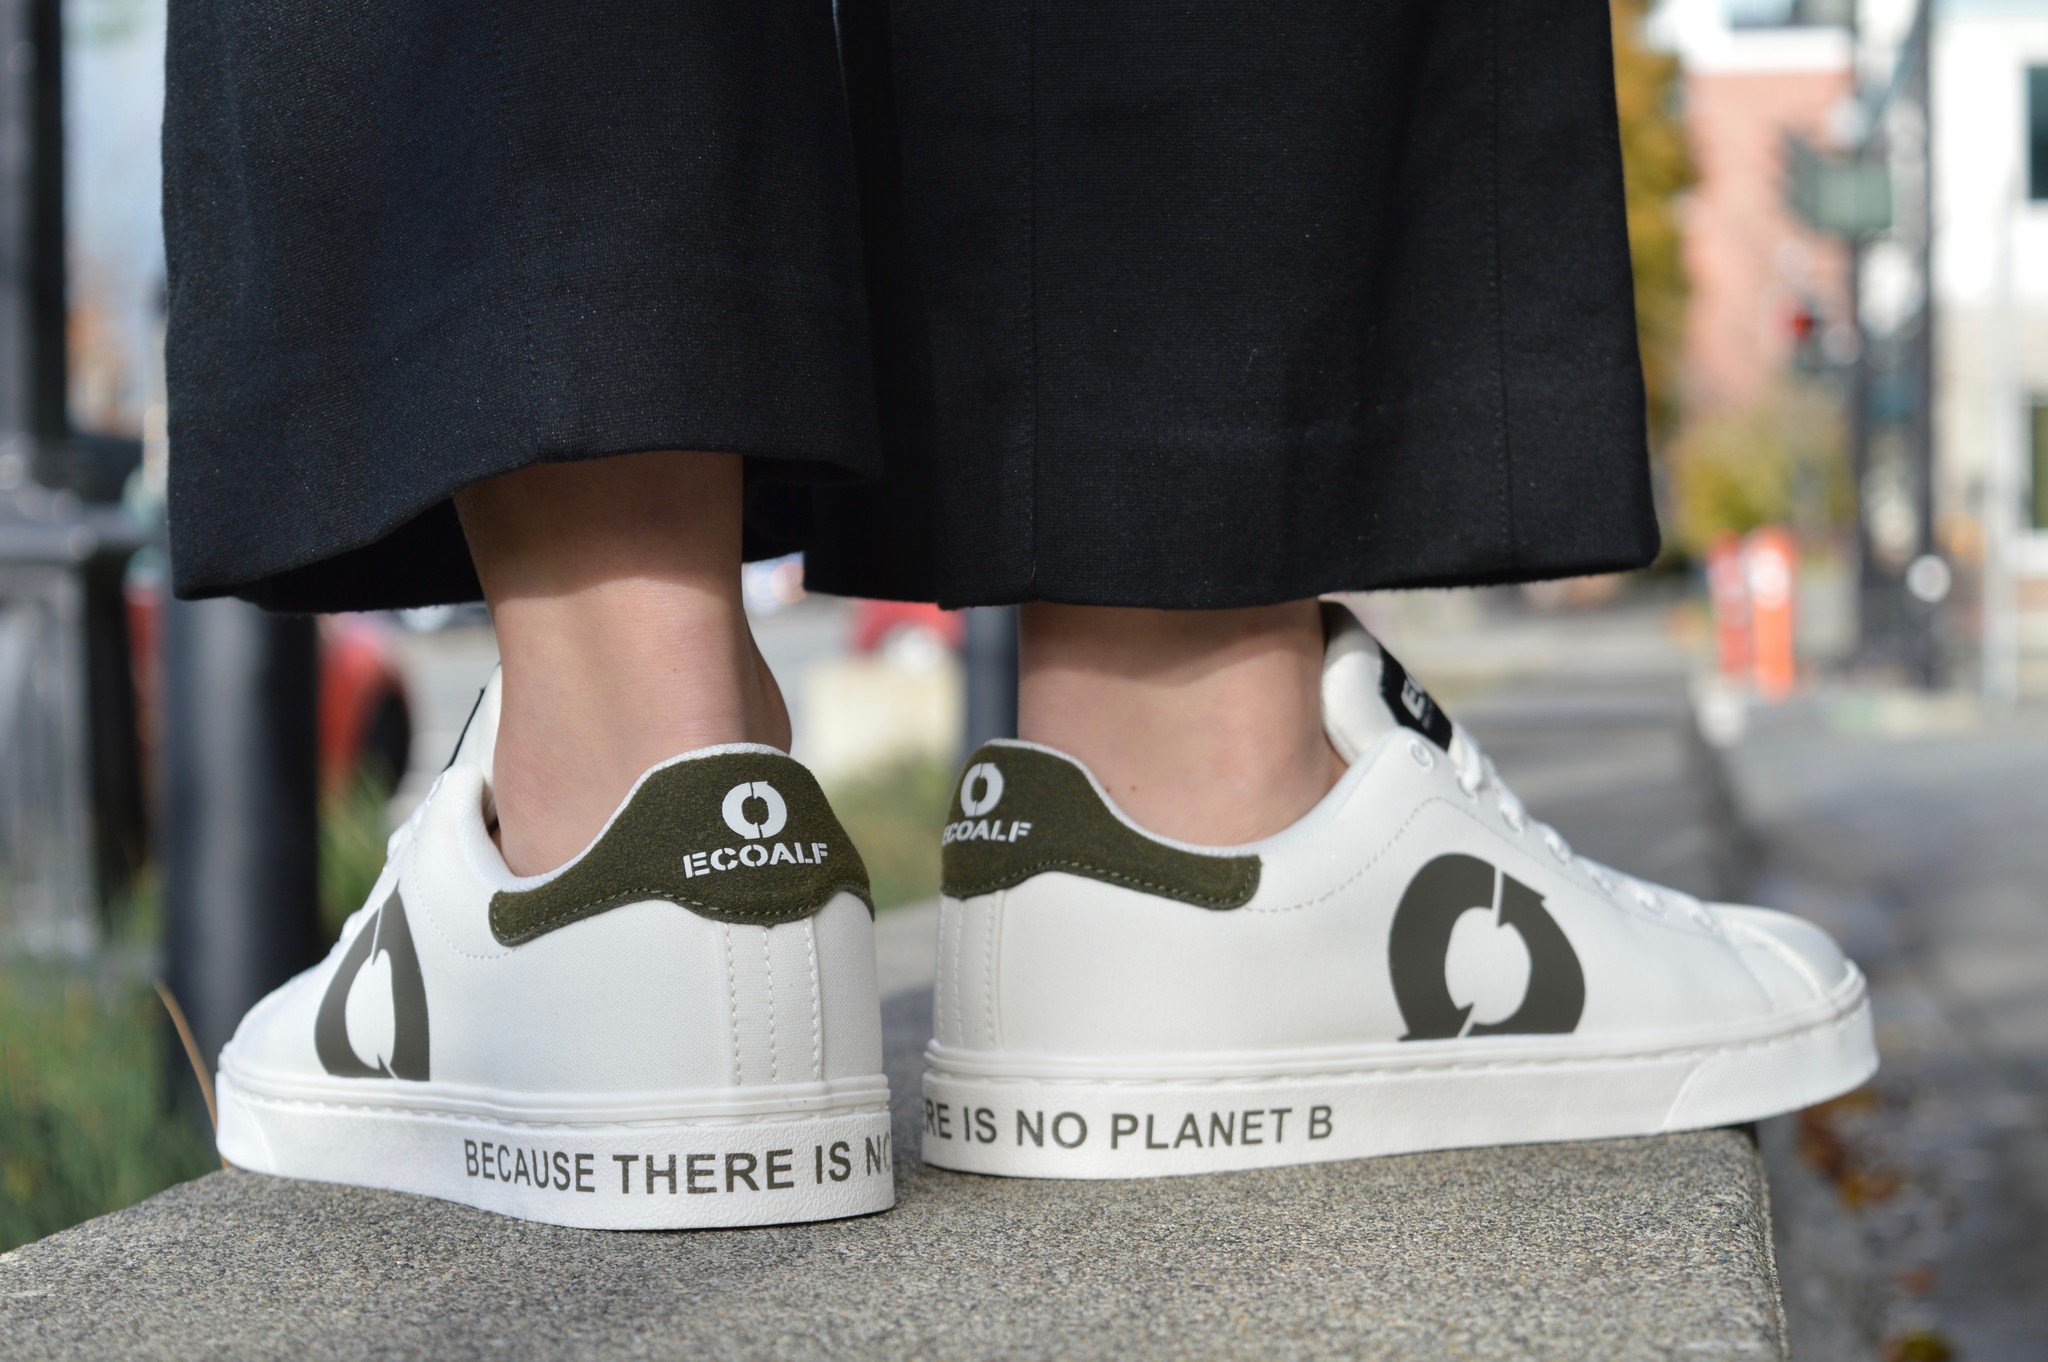 An eco-friendly sneaker made with sustainable materials and colors of white, beige, and light blue. The sole is made from recycled rubber and cork that say's because there is no planet B.